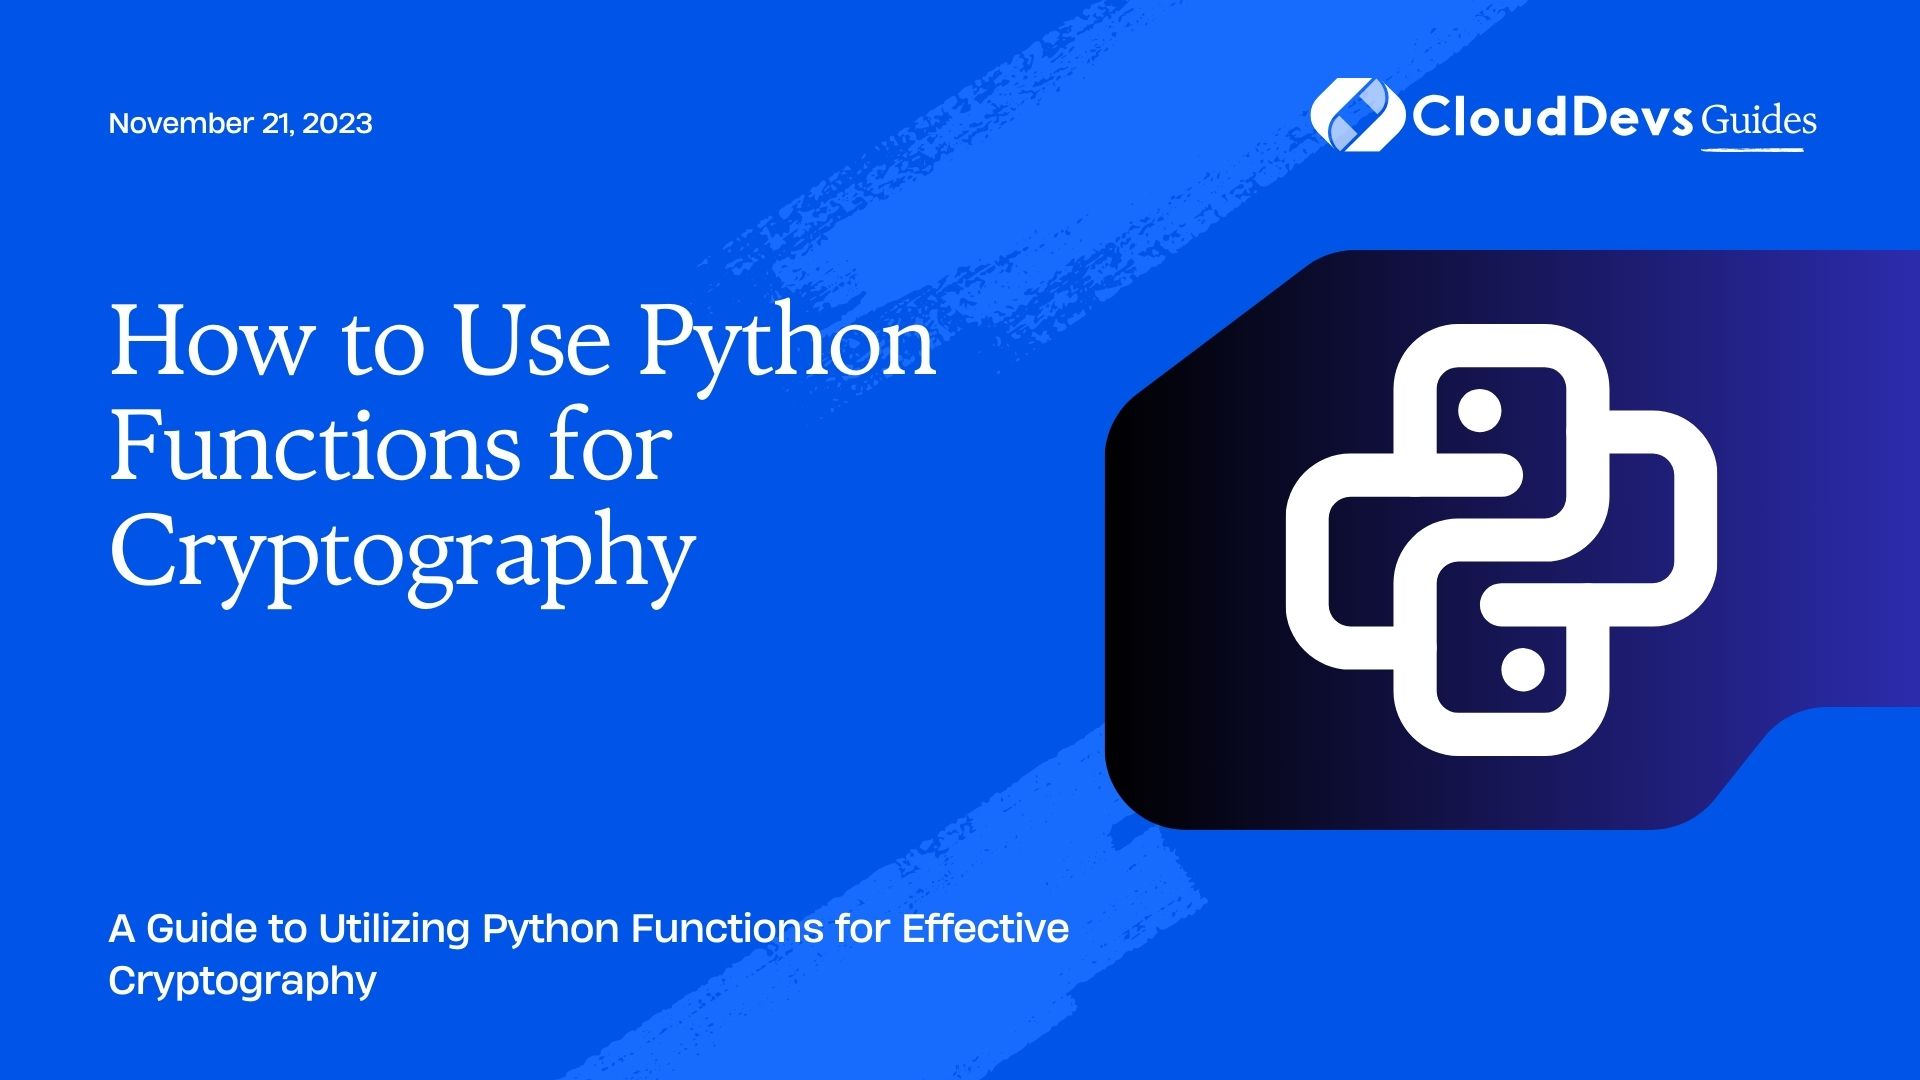 How to Use Python Functions for Cryptography